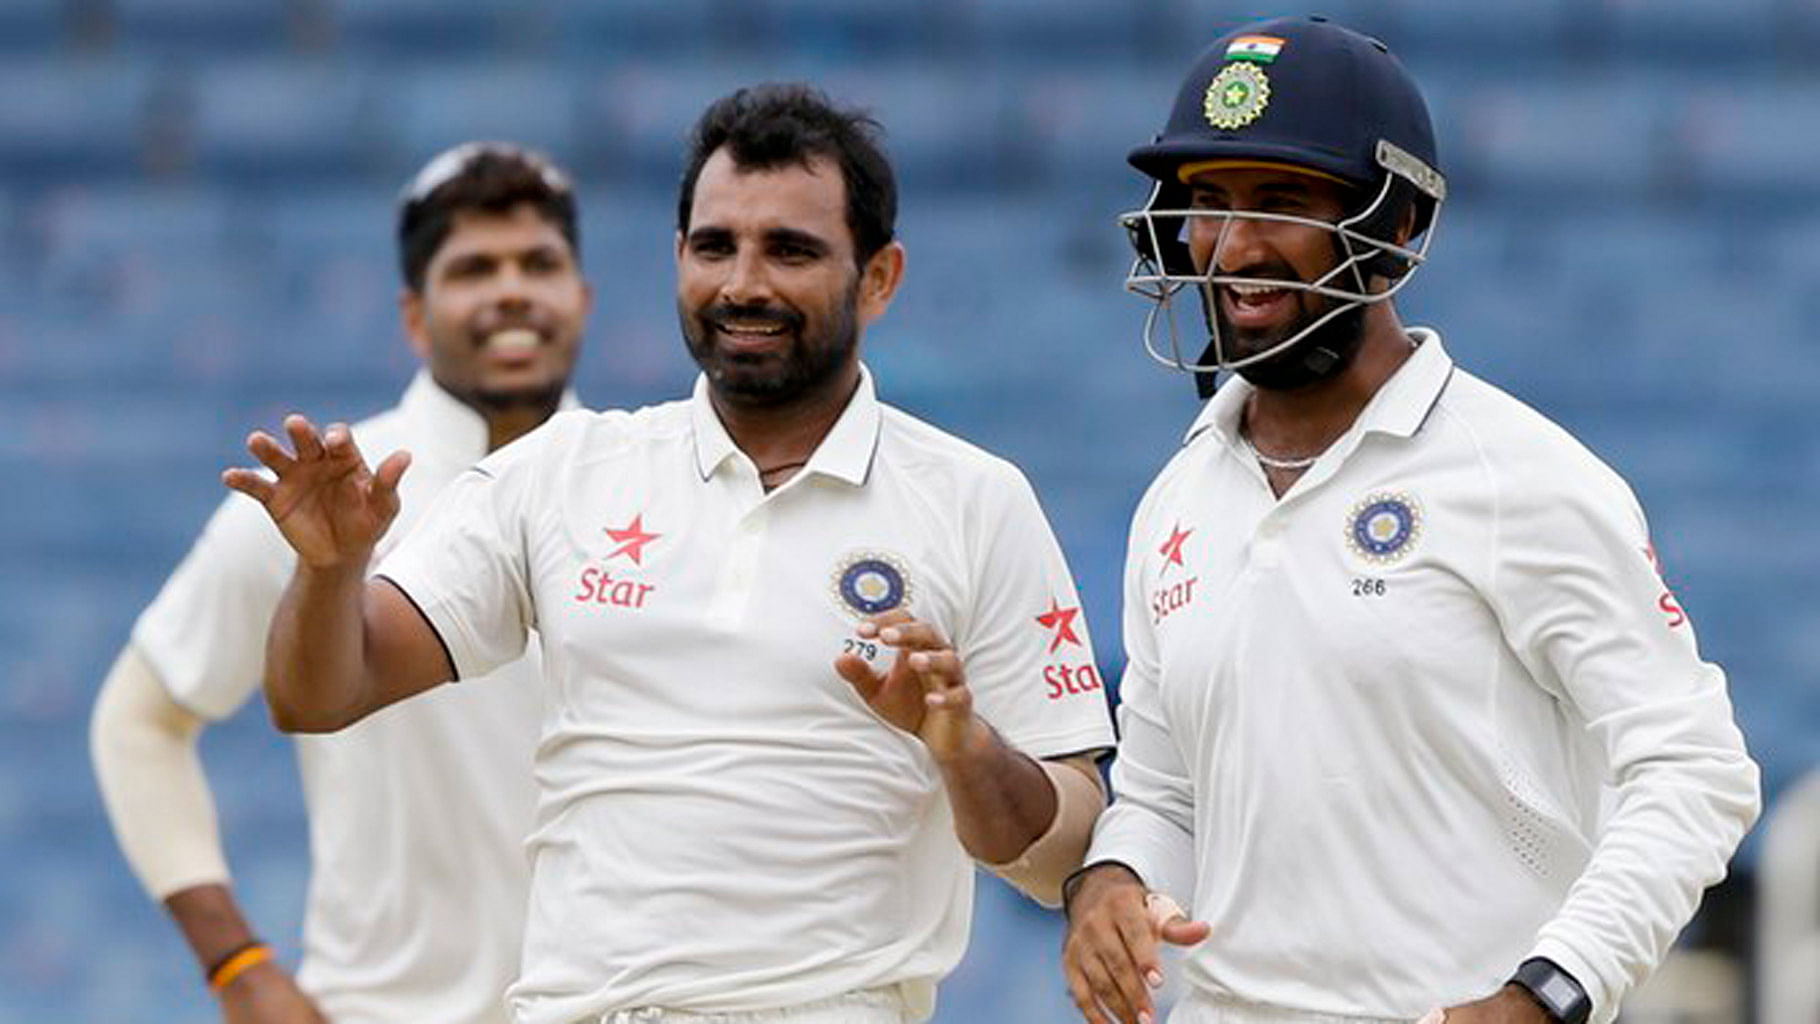 Mohammed Shami celebrates a wicket during the fourth day of the second Test against West Indies. (Photo: AP)